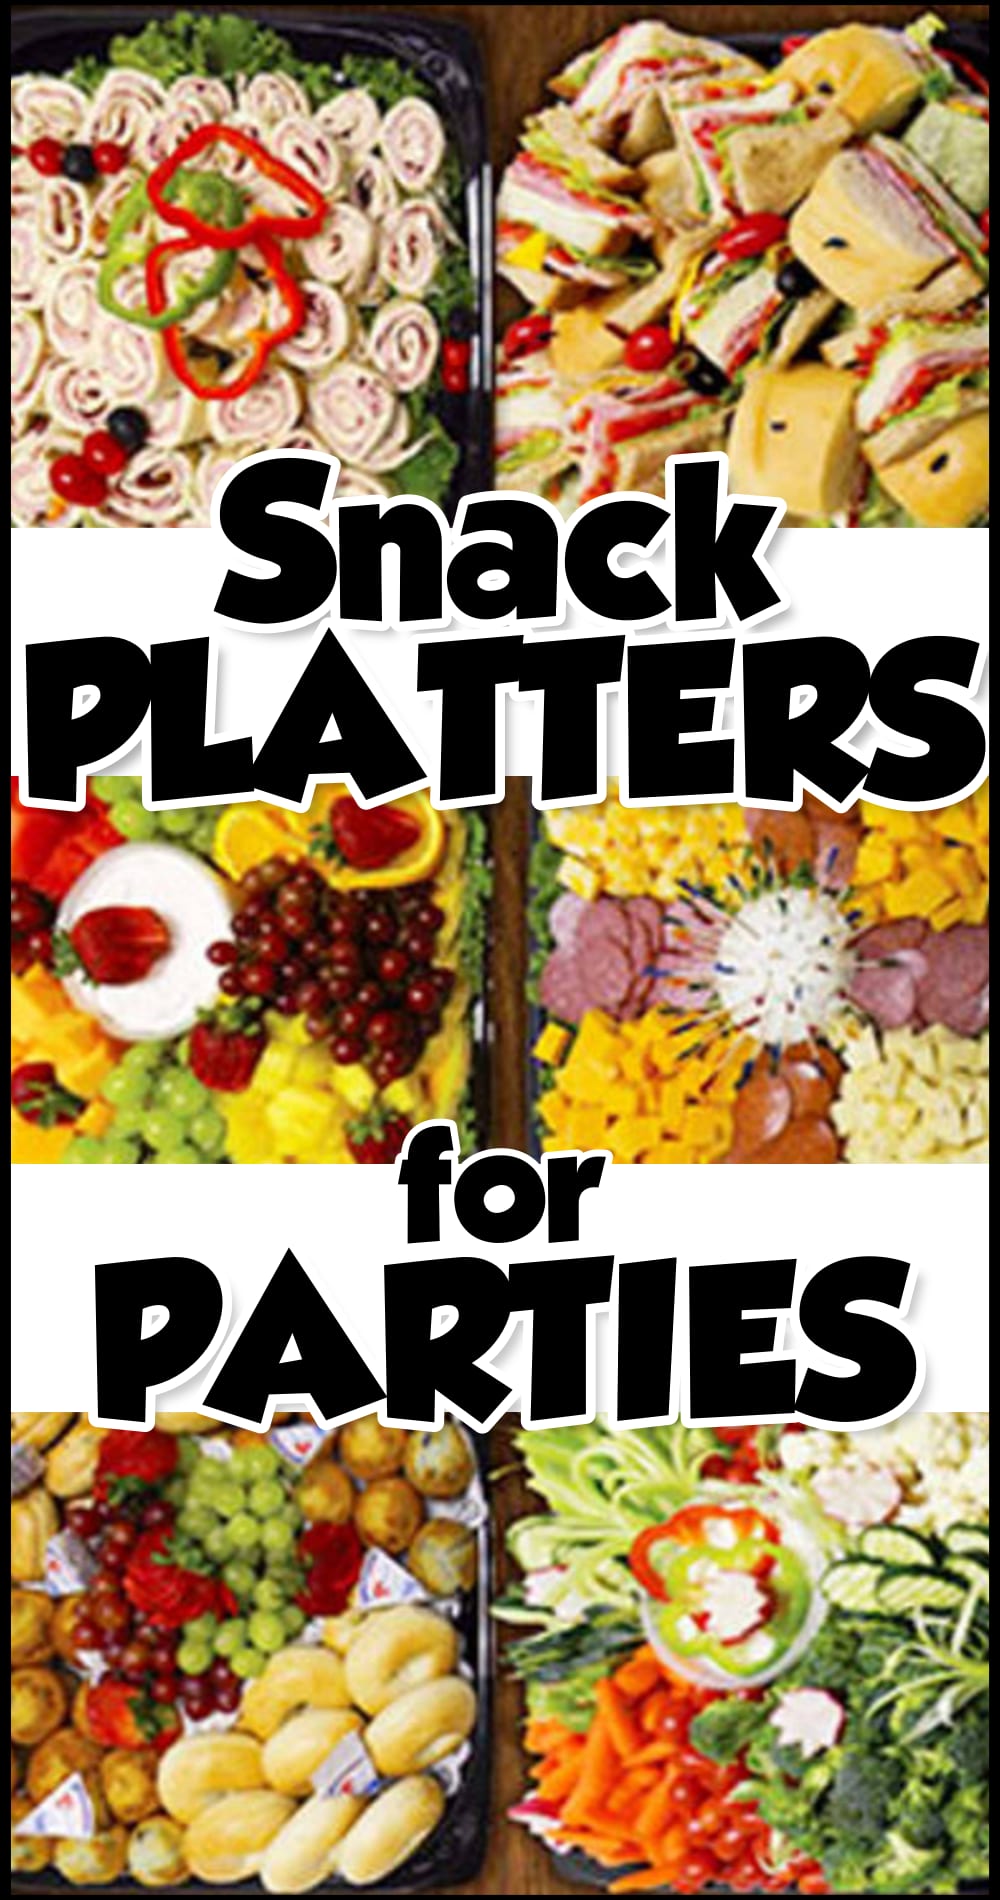 Snack Platters For Parties - easy buffet finger foods for party crowd or potluck at work or church